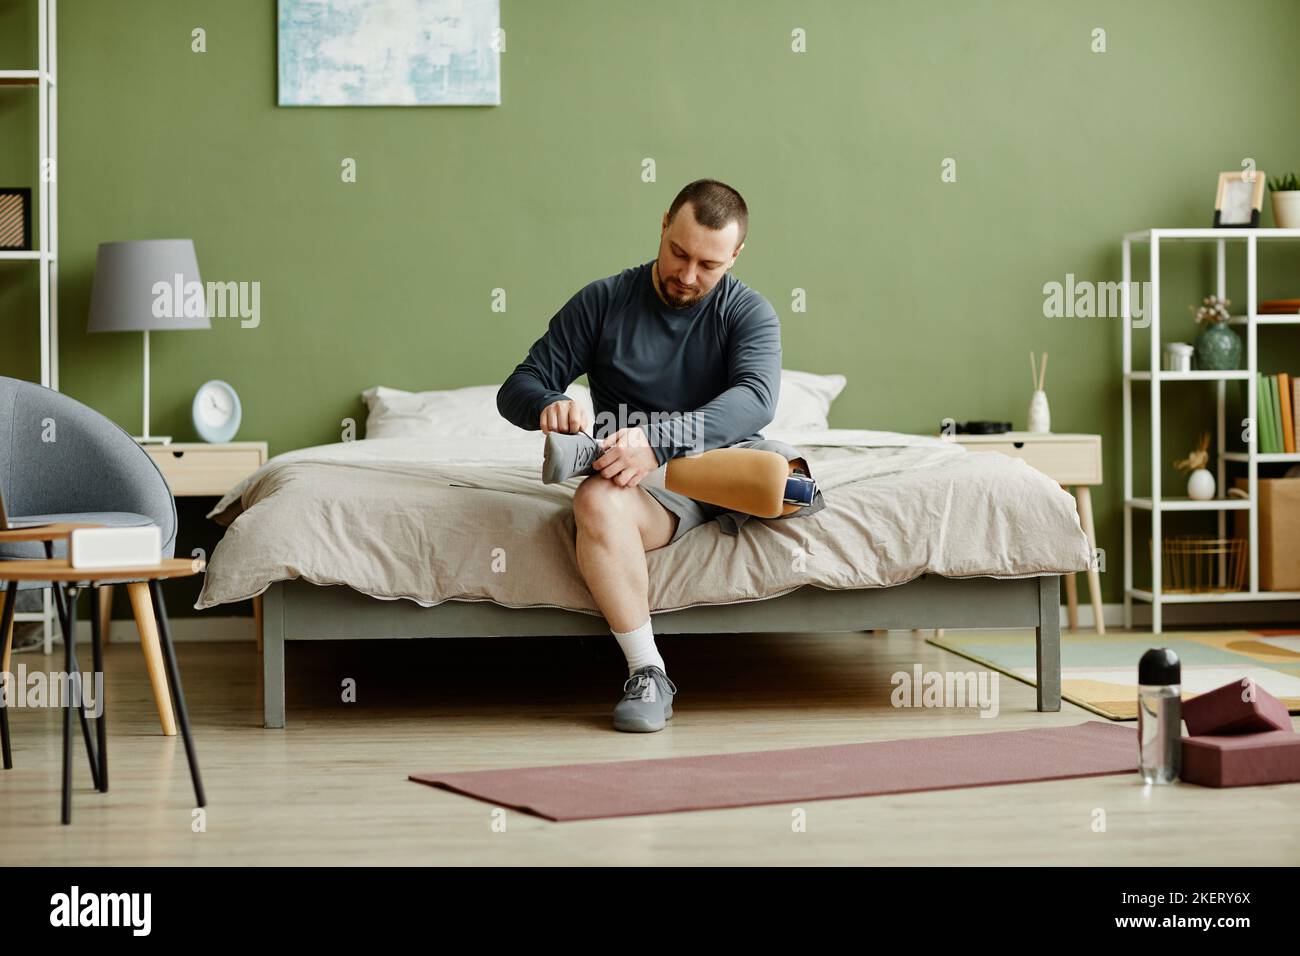 Full length portrait of adult man fixing prosthetic leg and getting ready to work out at home, copy space Stock Photo